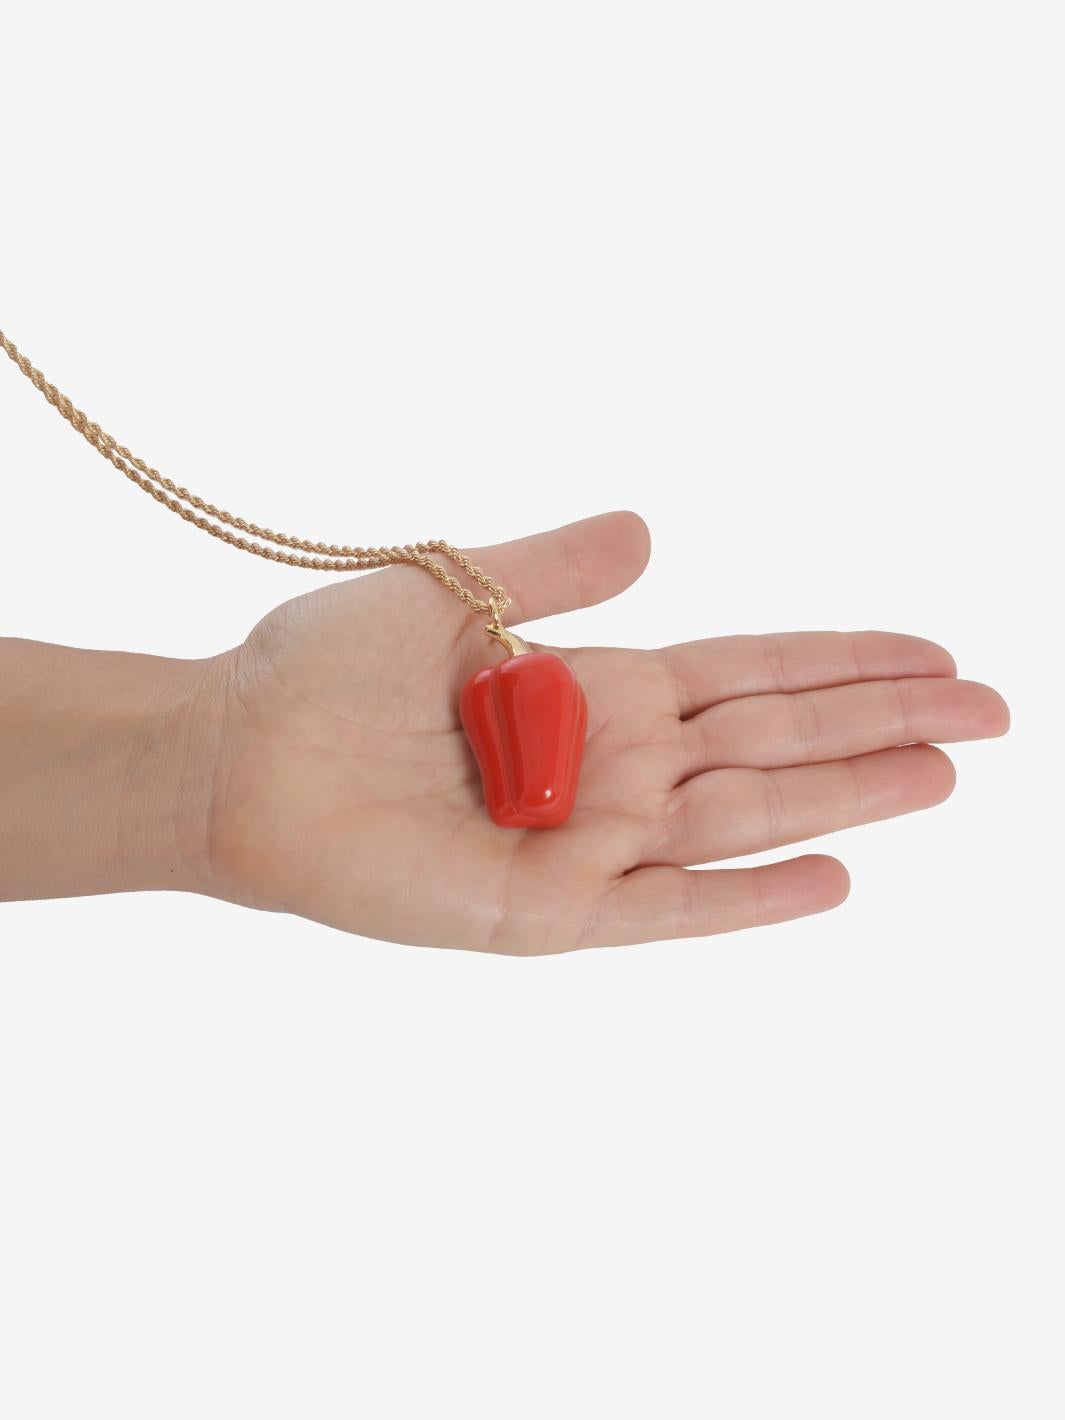 Kenneth Jay Lane Red Bell Pepper Necklace In Excellent Condition For Sale In Milano, IT